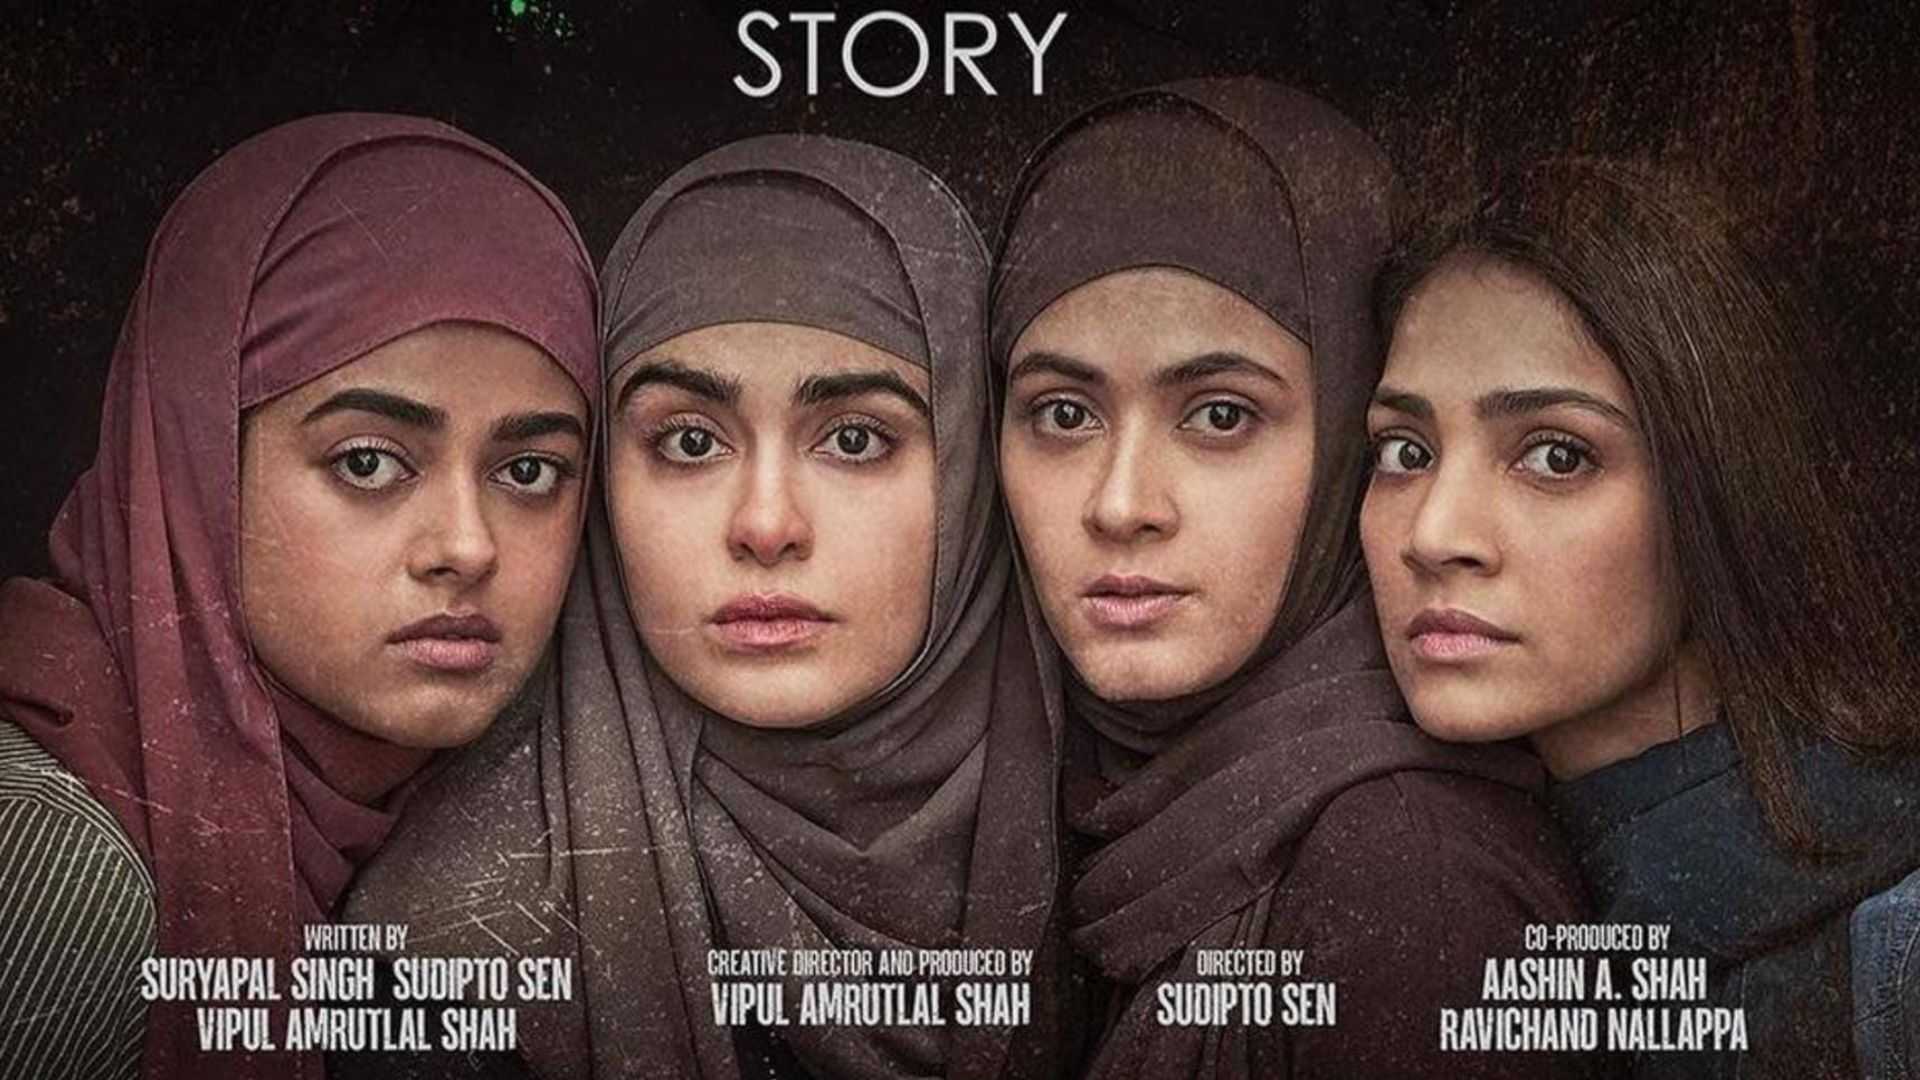 The Kerala Story enters Rs 50 crores club despite controversies and bans; records 5th highest opening 2023 after Pathaan